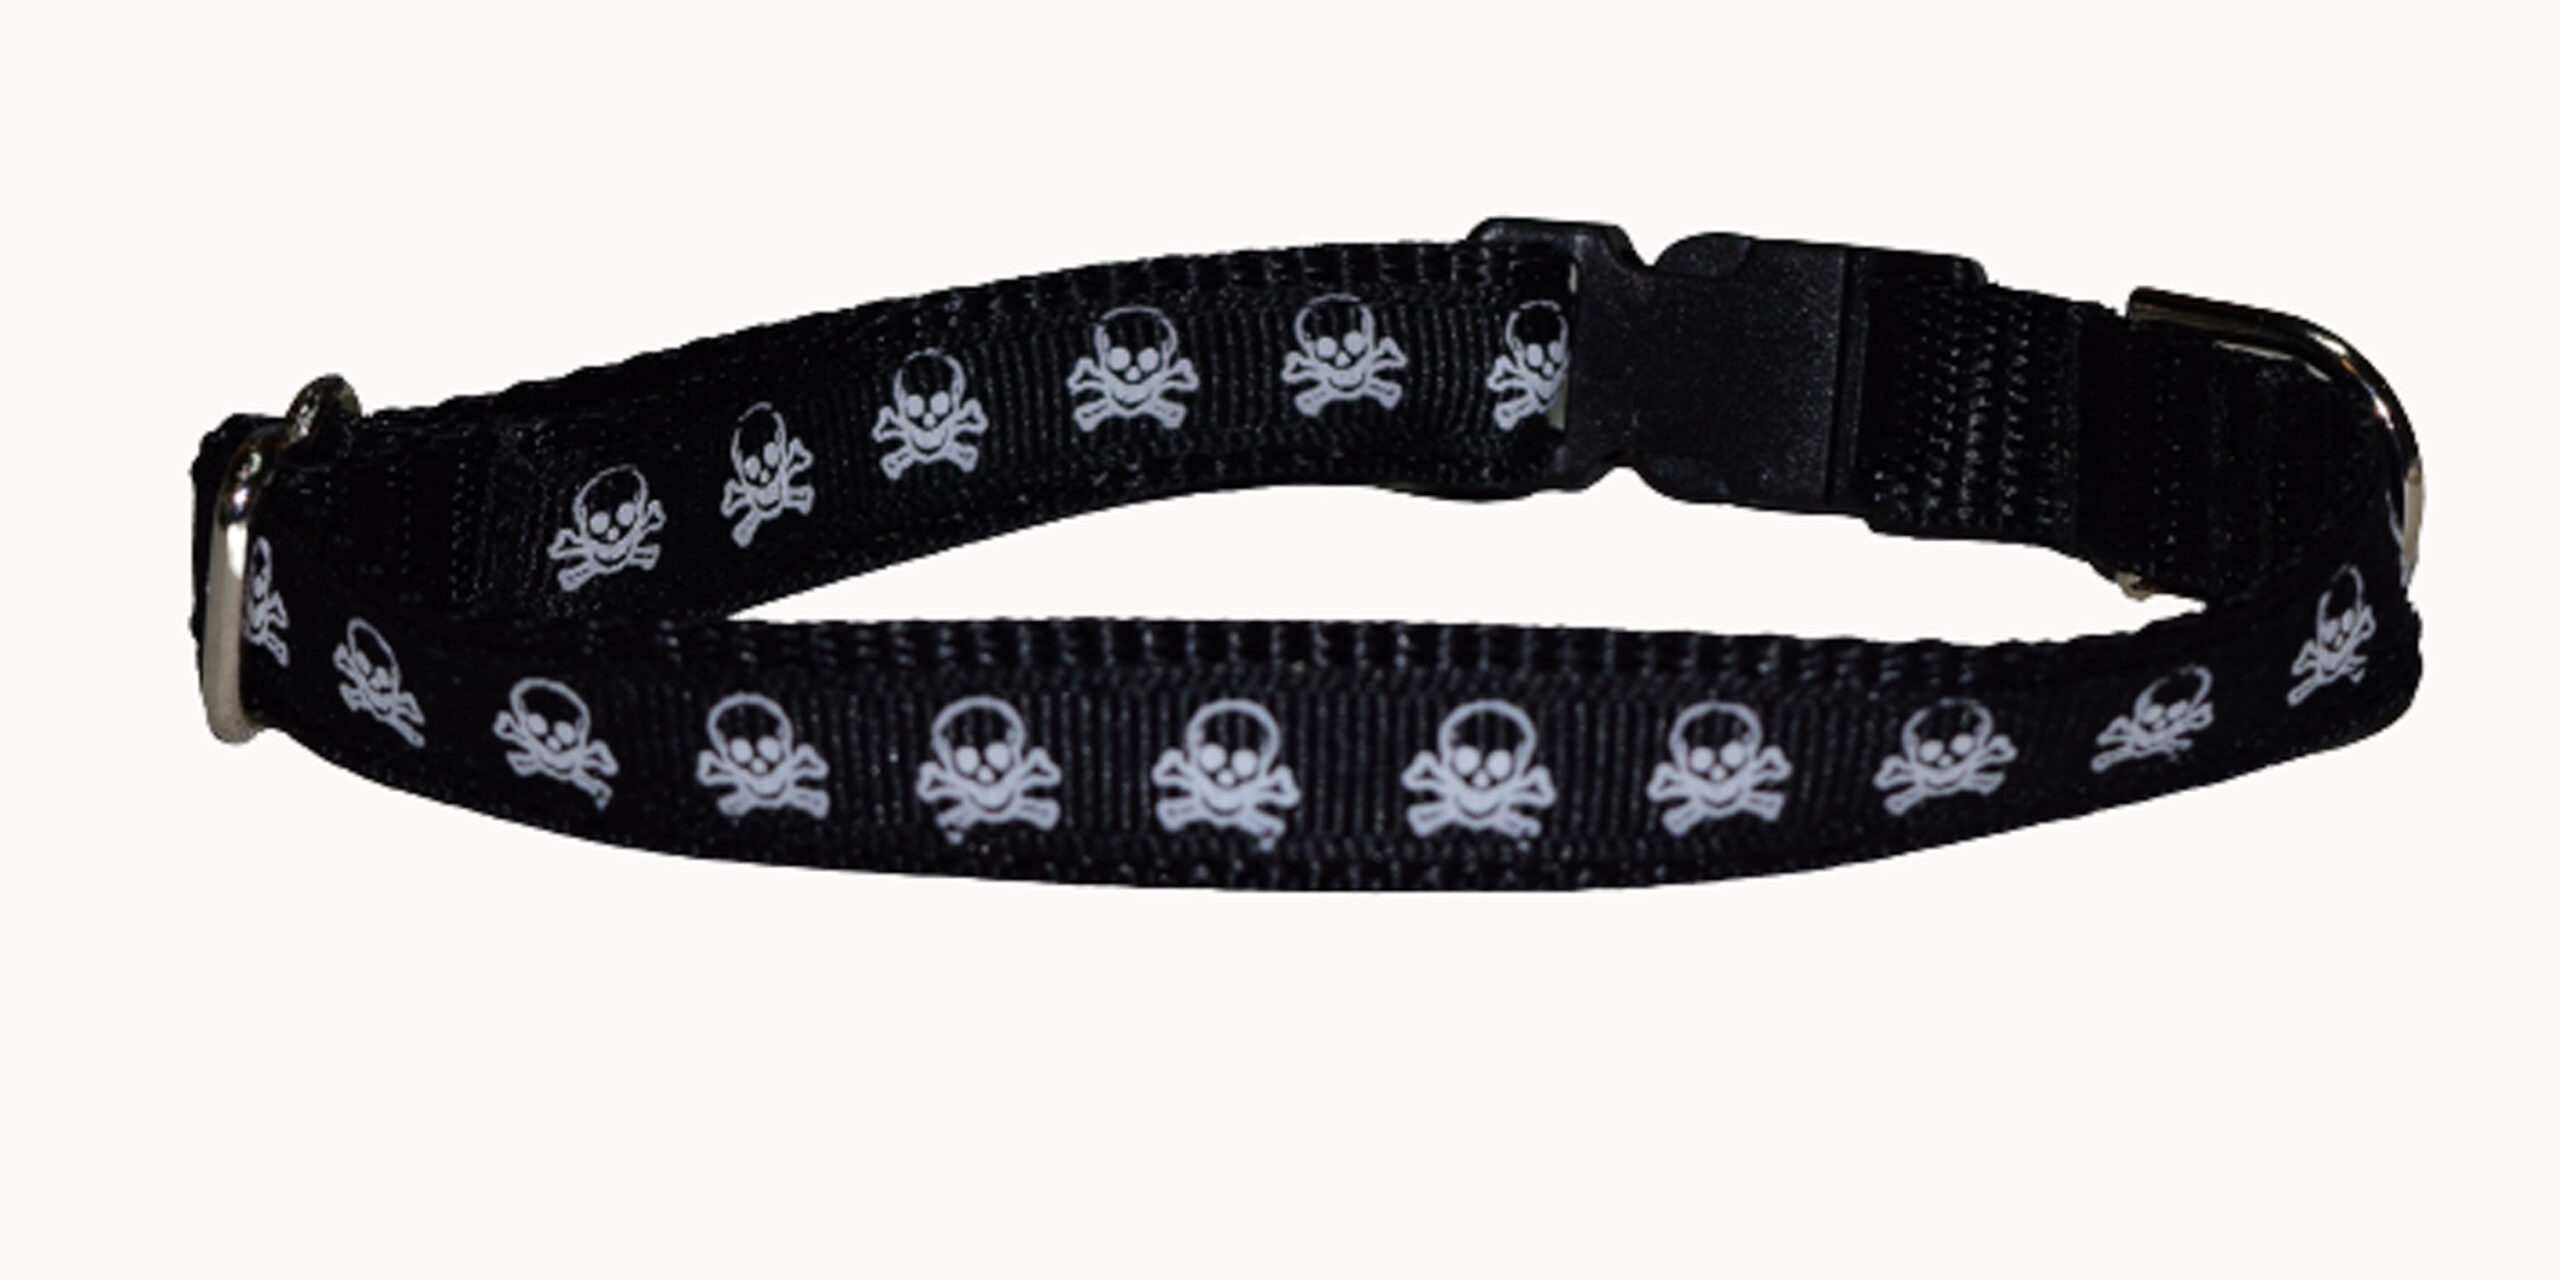 Pirate Skull and Crossbones Wholesale Dog and Cat Collars